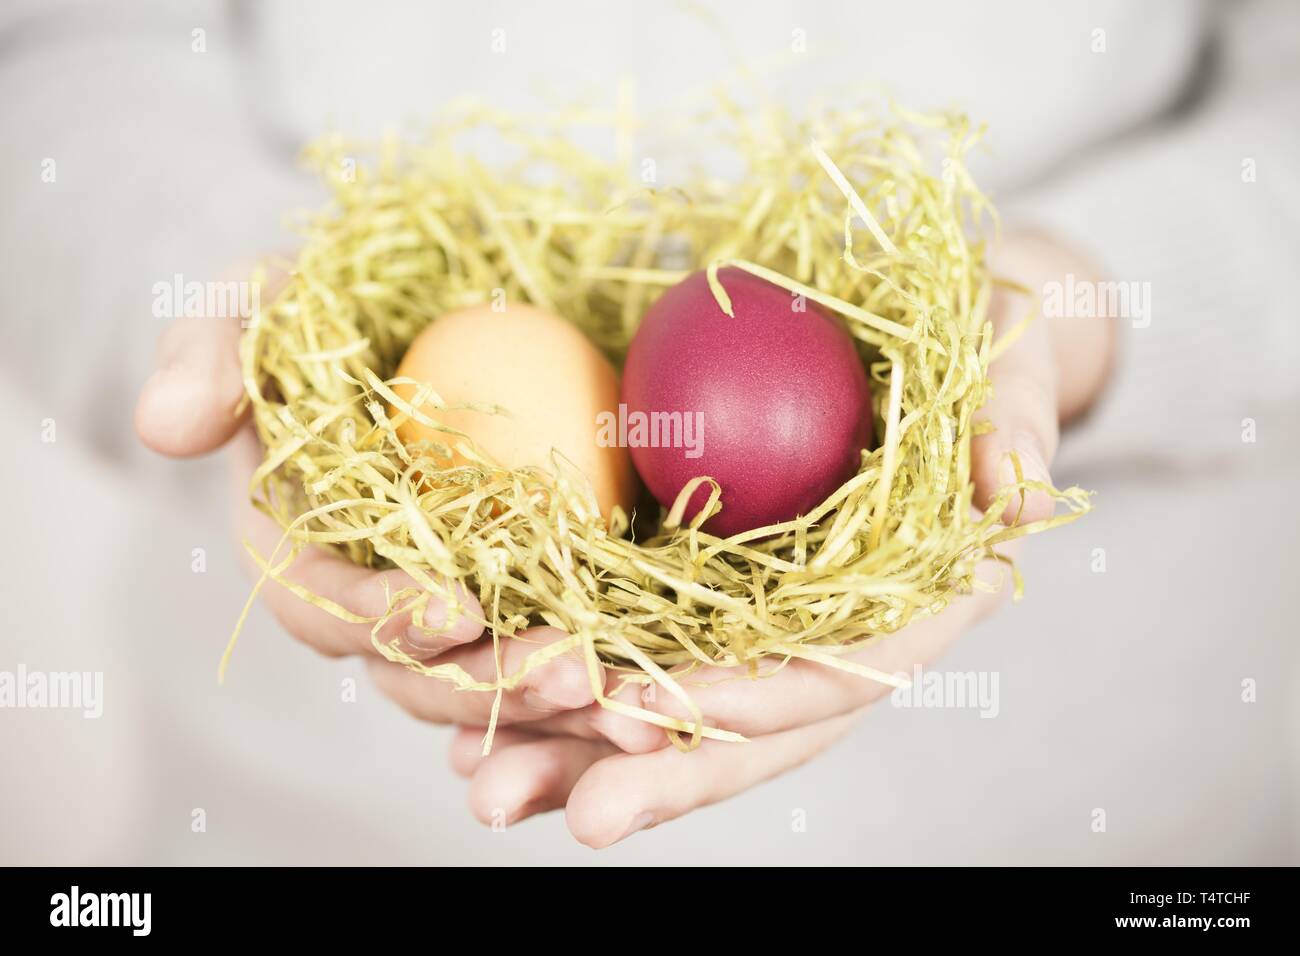 Hands holding Easter basket with two eggs Stock Photo